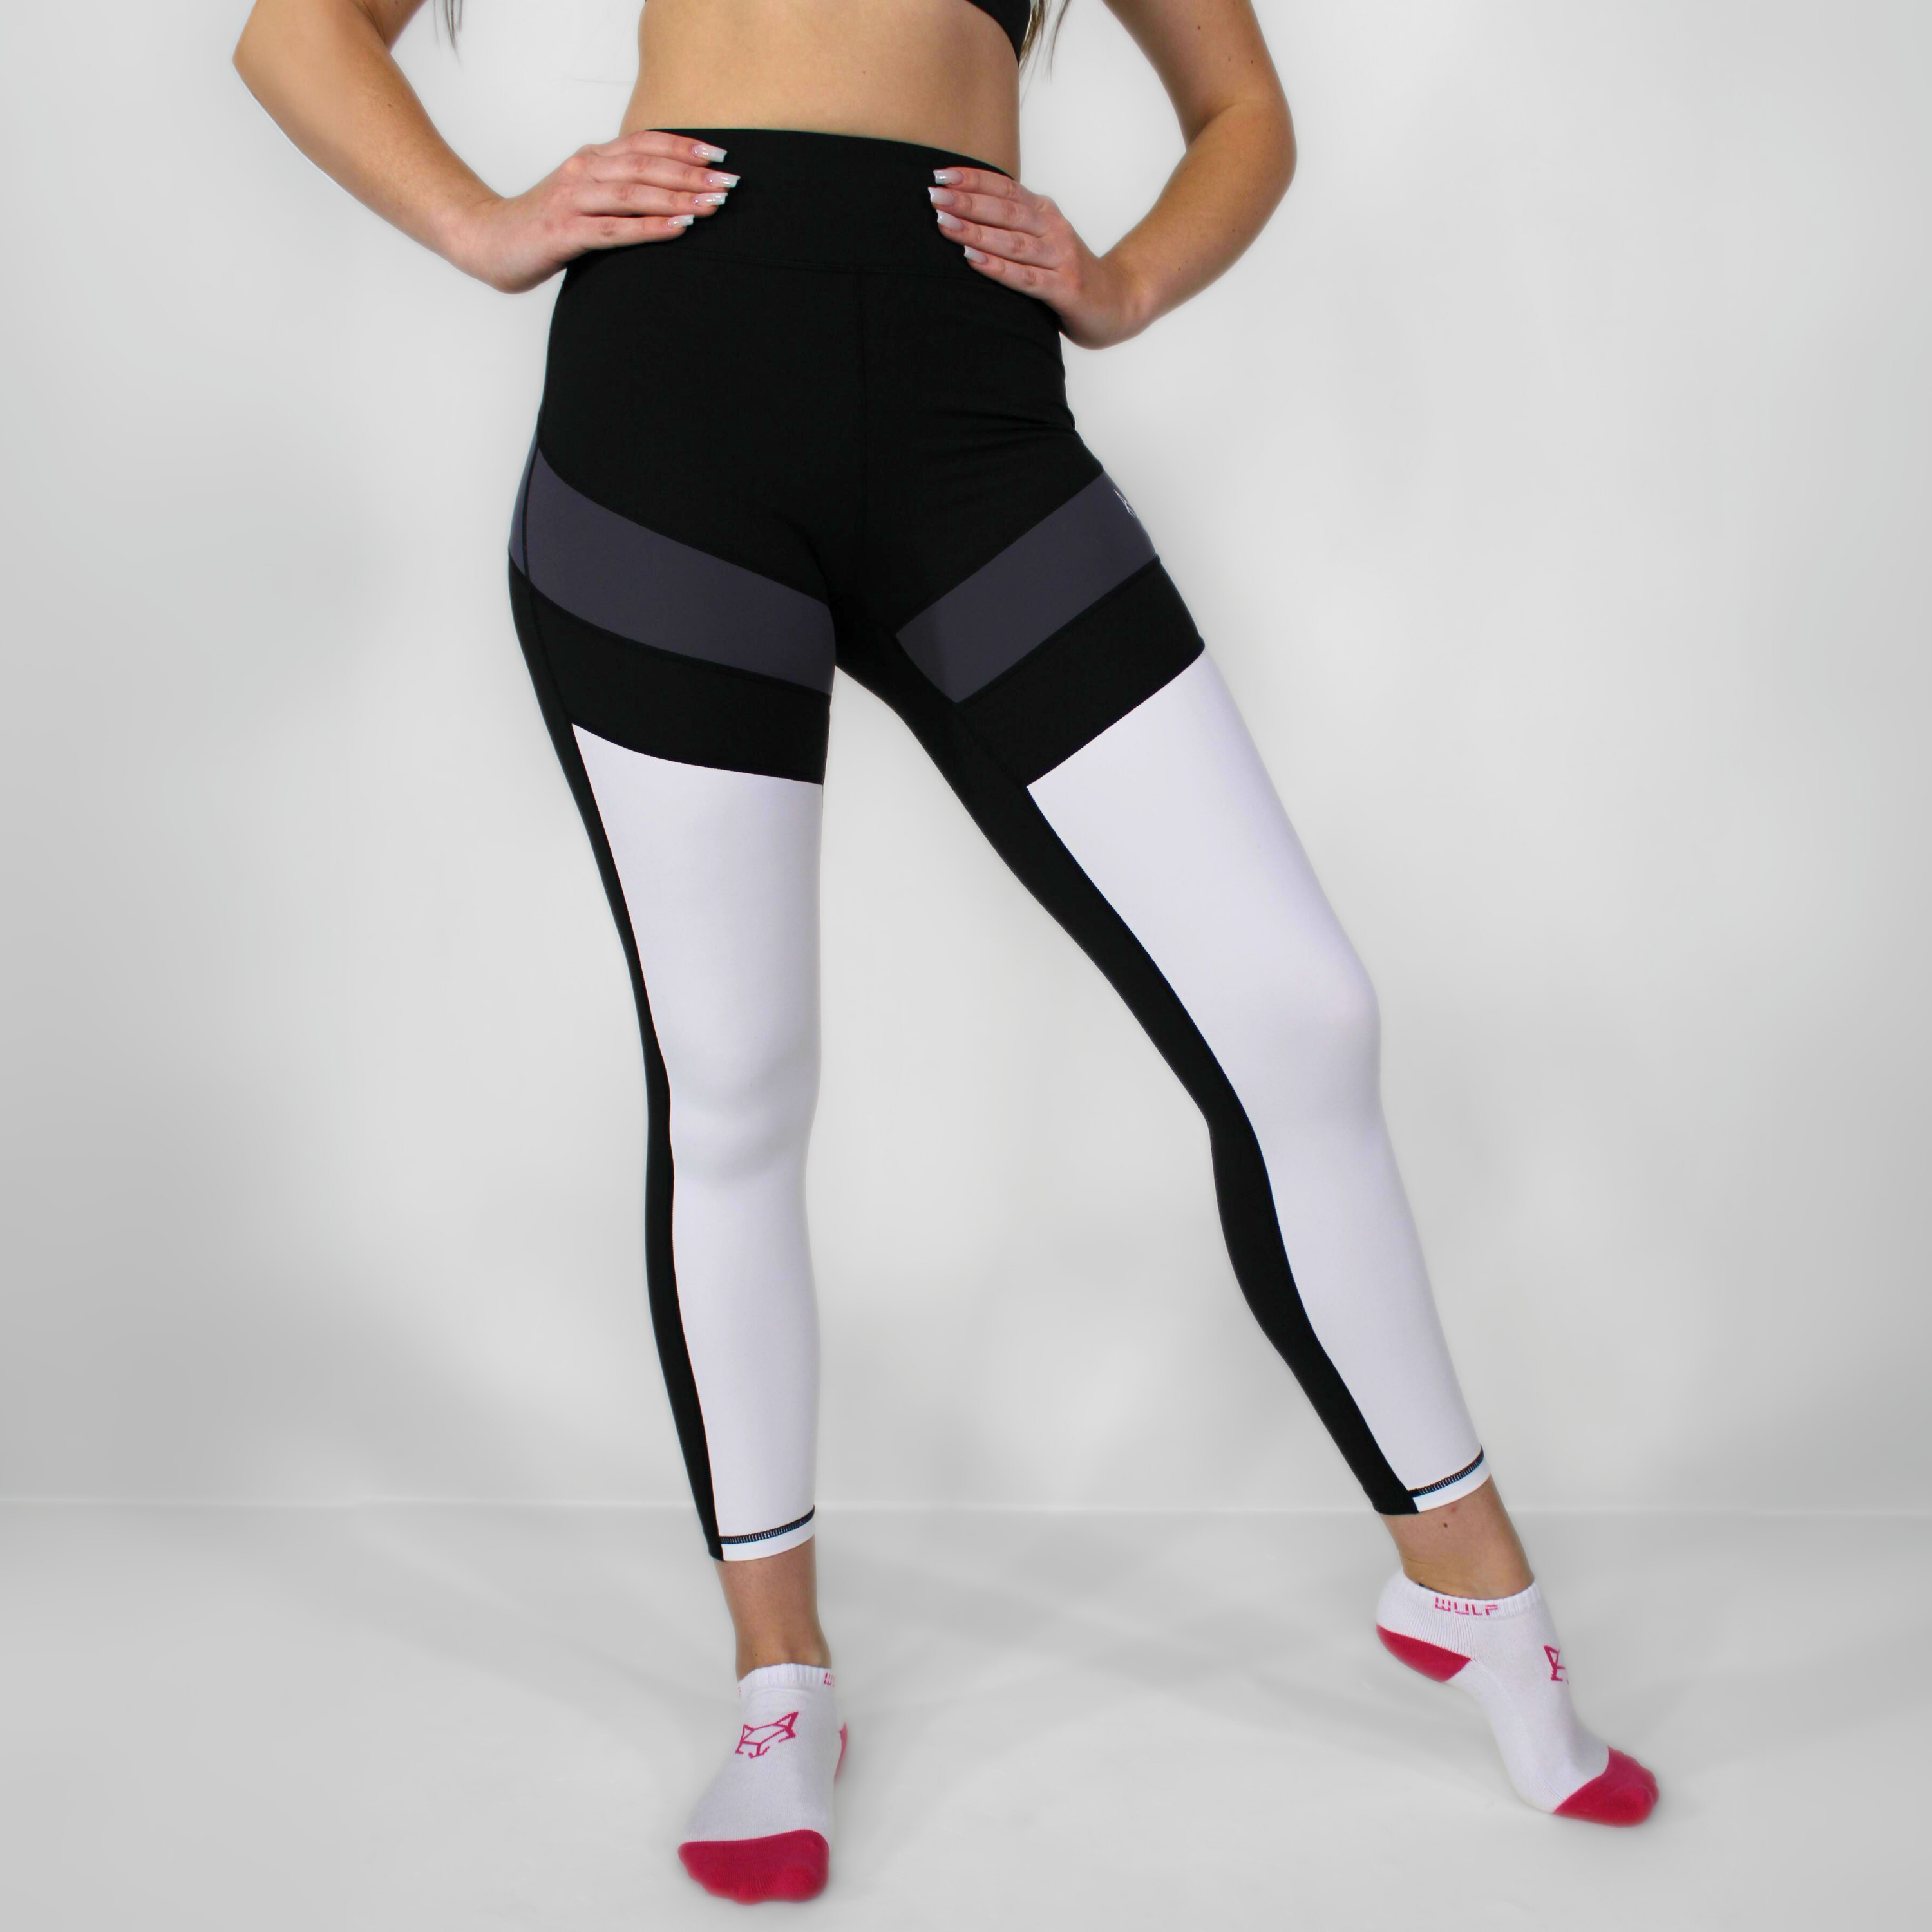 WULF Women's High Waisted Leggings, the epitome of high-end athletic wear that effortlessly combines style and functionality. Engineered to keep you securely supported during intense sprints, invigorating sweat sessions, and empowering squats, these sports leggings create a flawless, figure-hugging silhouette that enhances your confidence with every single step.